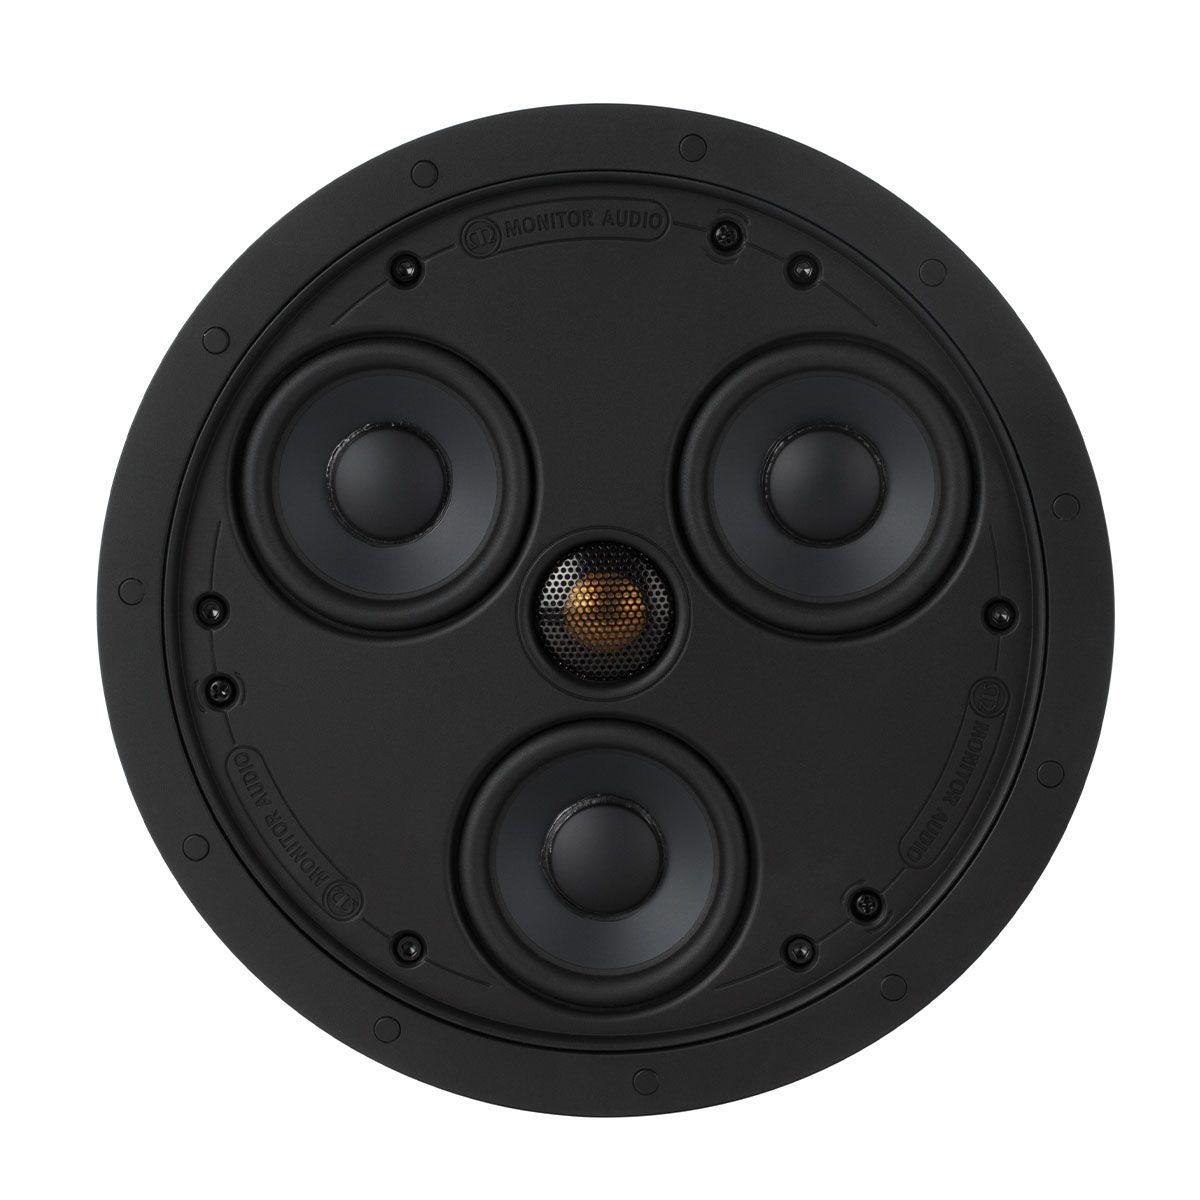 Monitor Audio CSS230 Super Slim In-Ceiling Loudspeaker - front view without grille